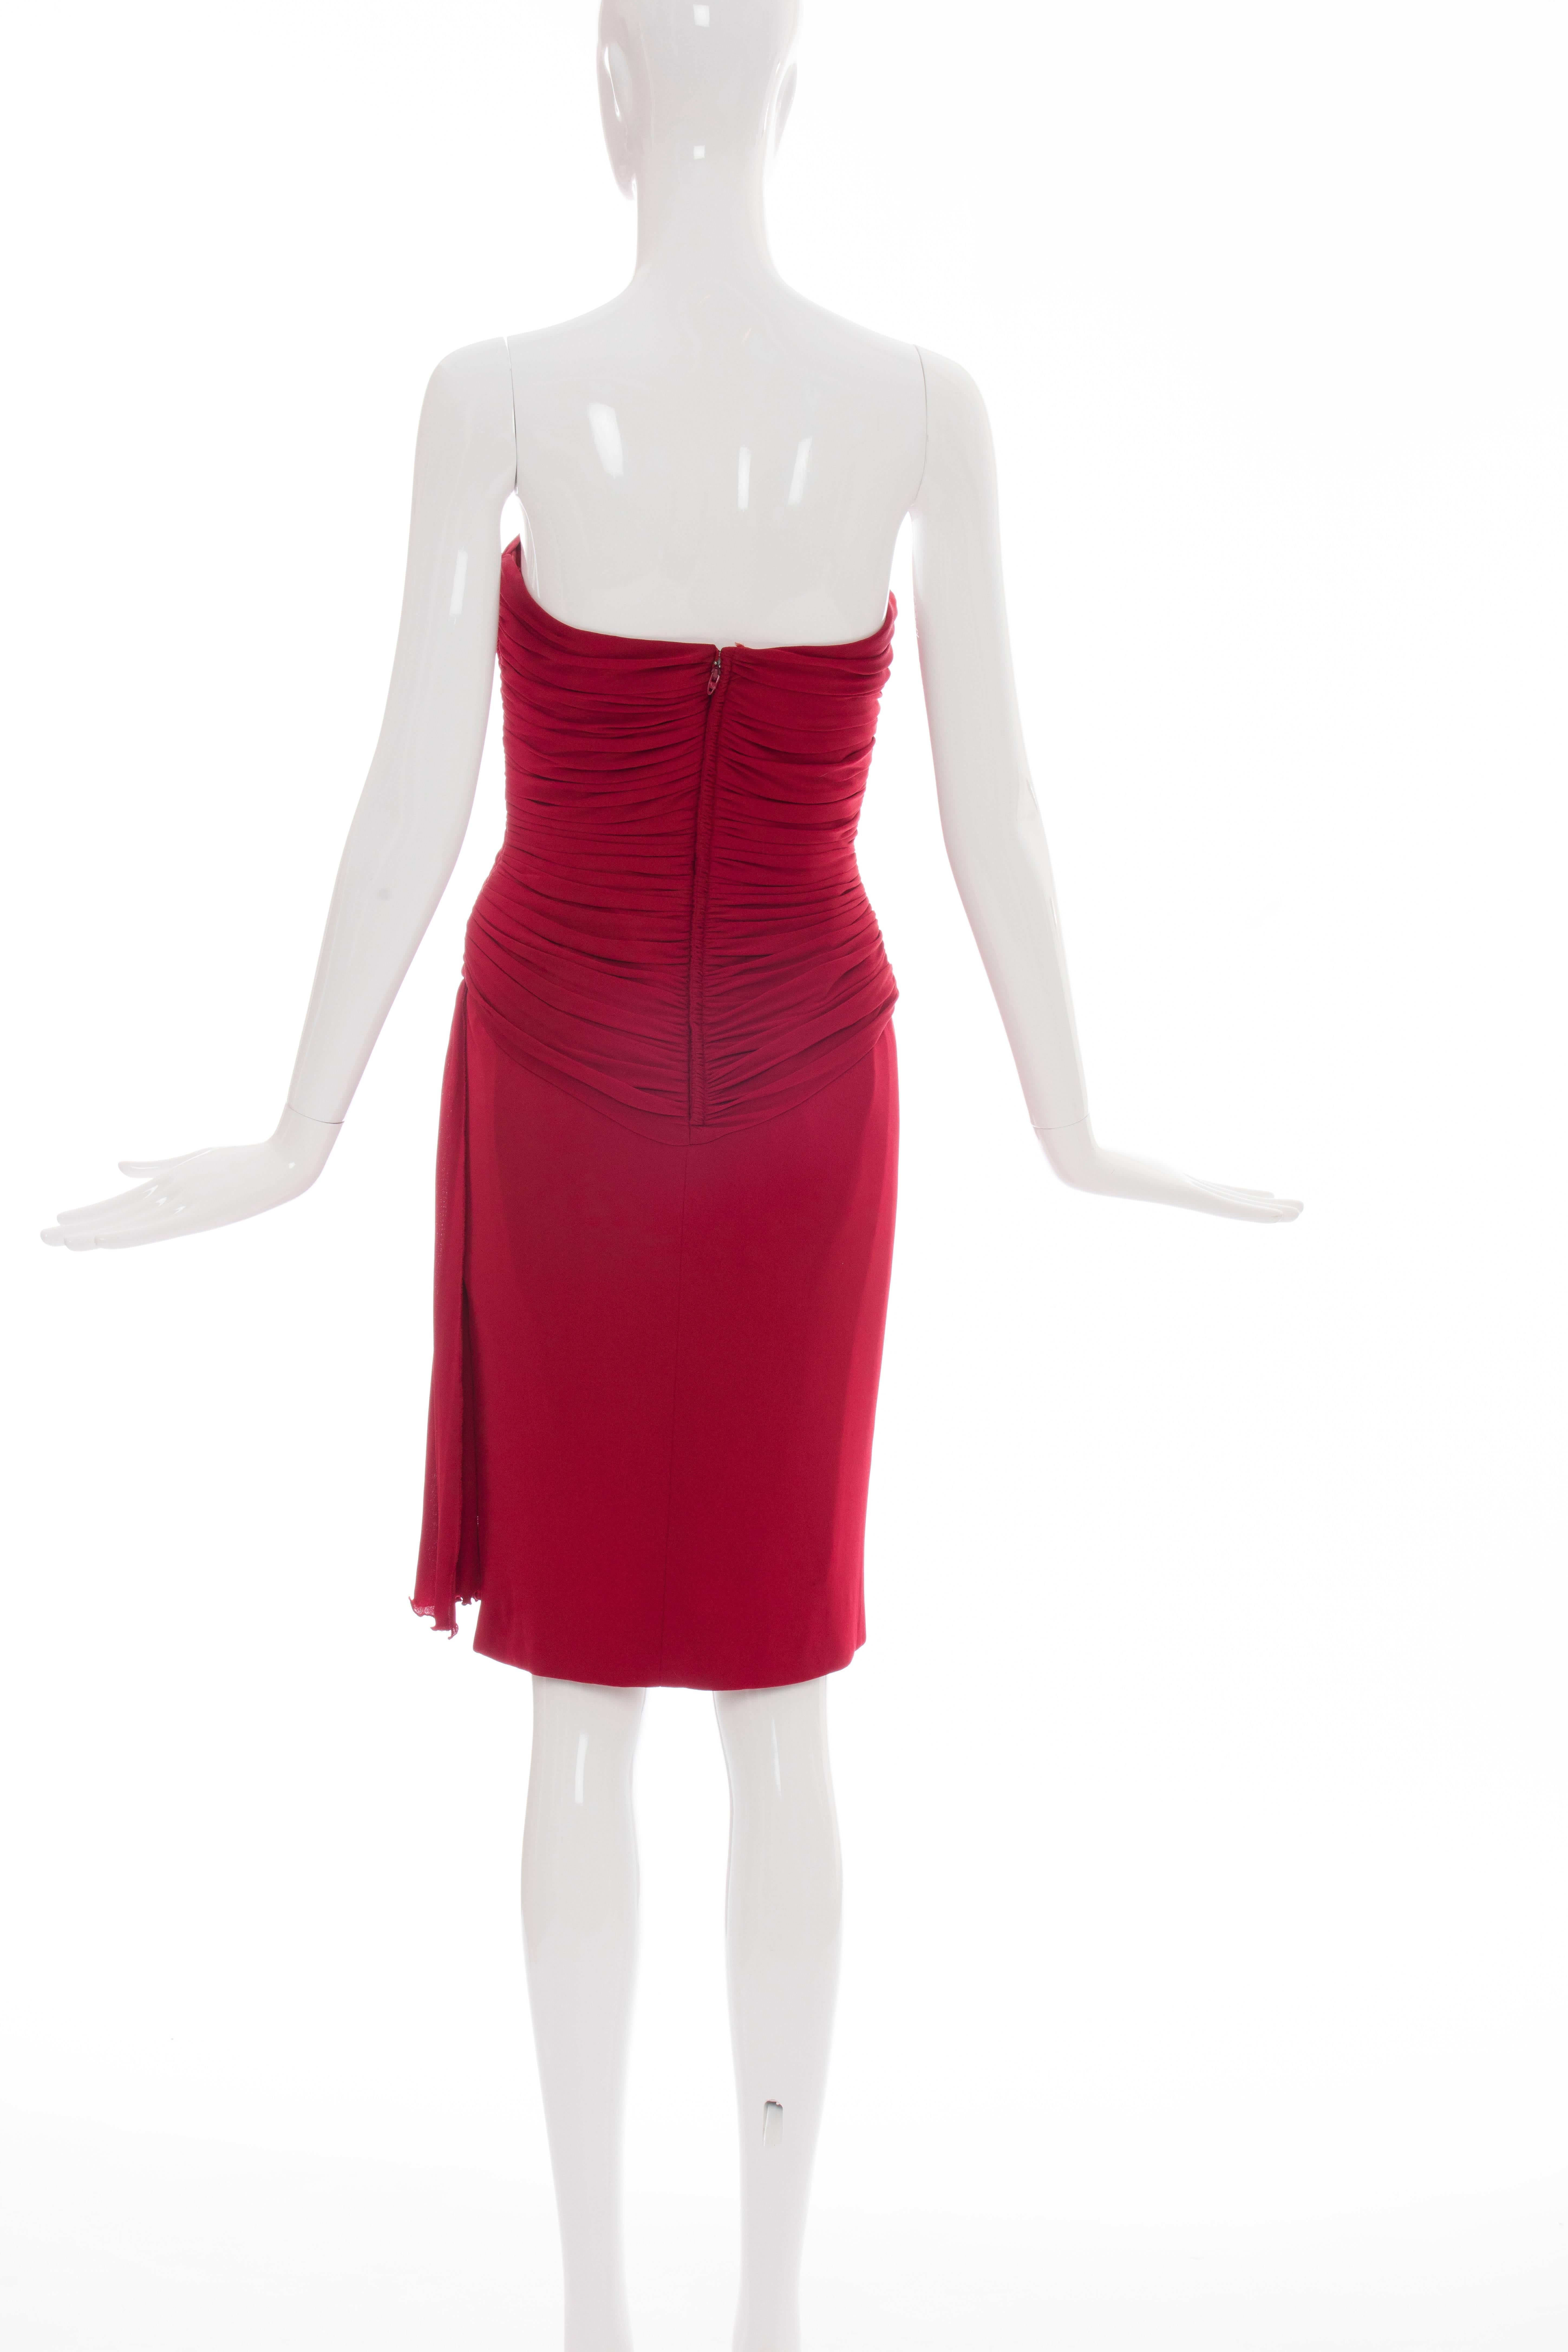 Vicky Tiel Couture Red Strapless Dress With Ruched Bodice, Circa 1980's In Good Condition For Sale In Cincinnati, OH